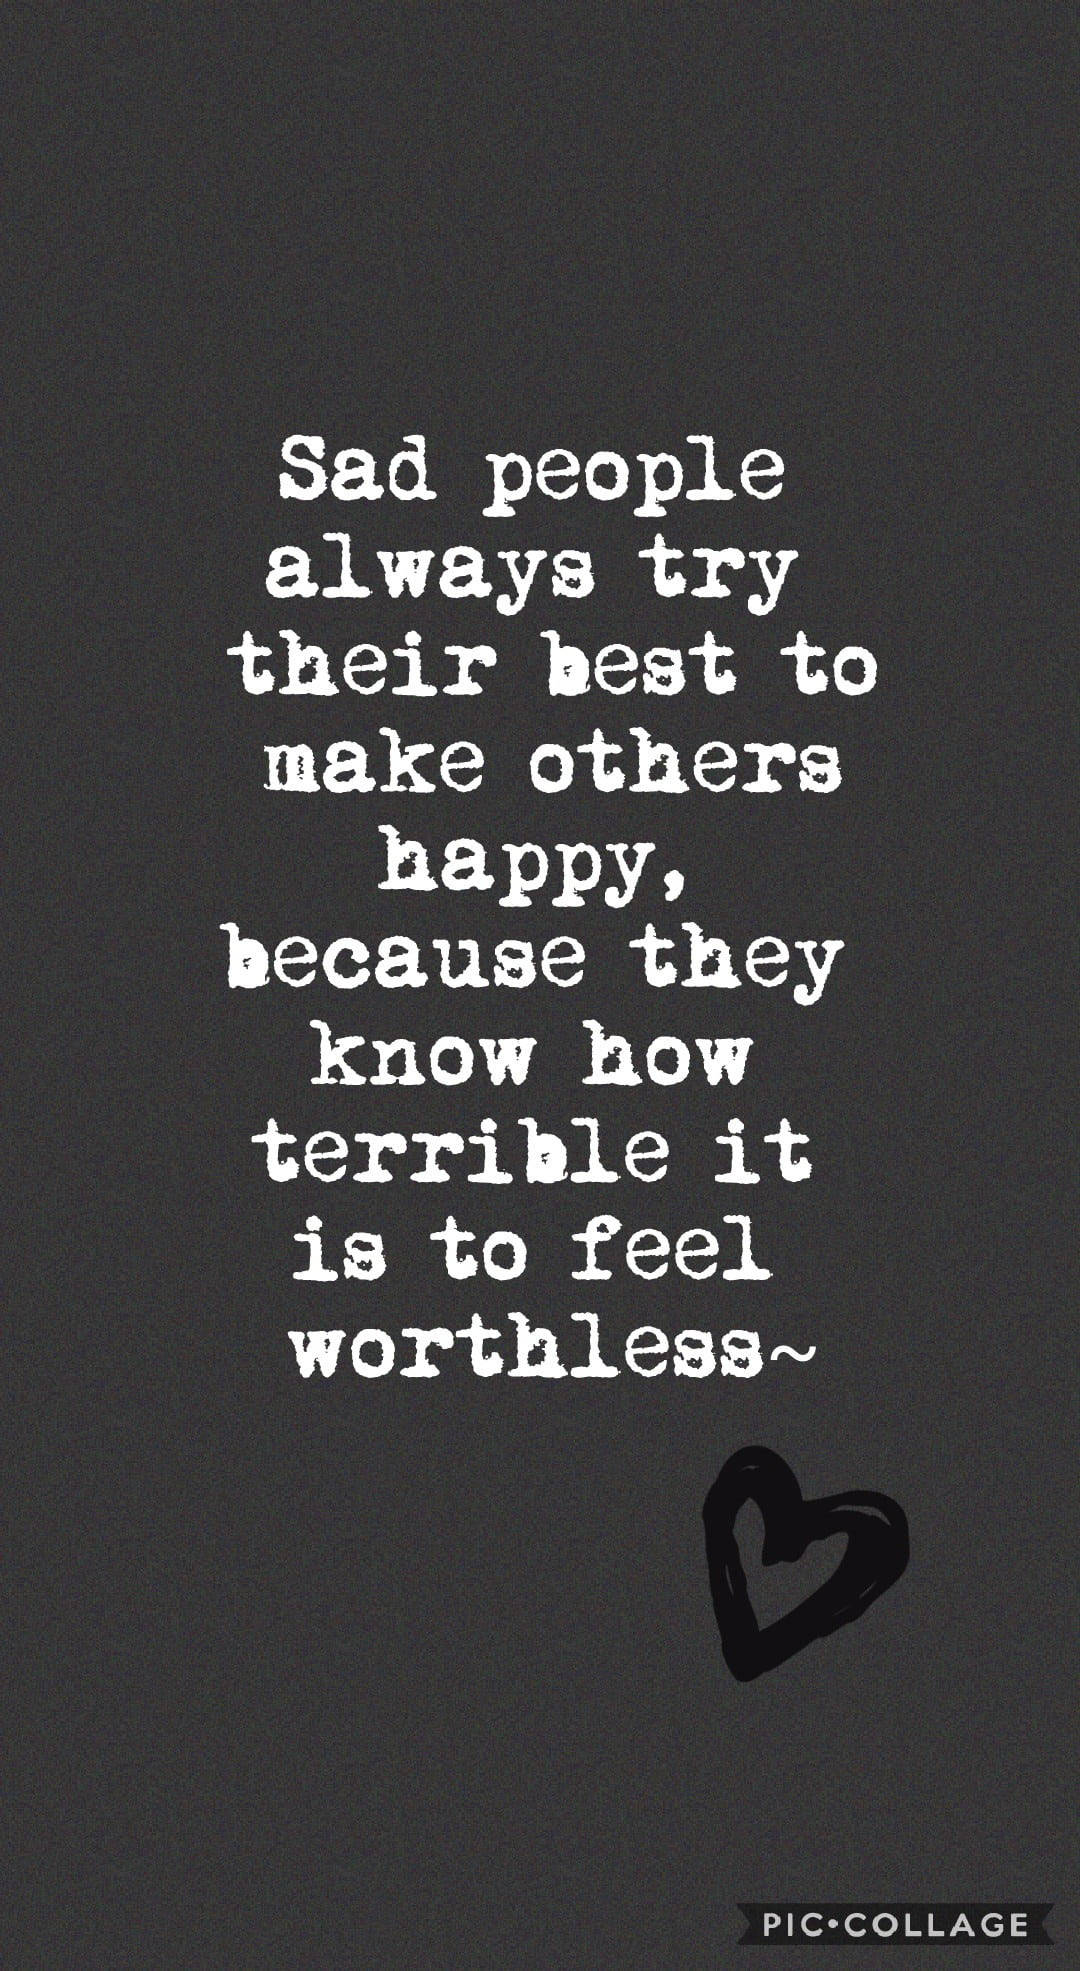 Download Lonely Quotes Sad People Wallpaper 